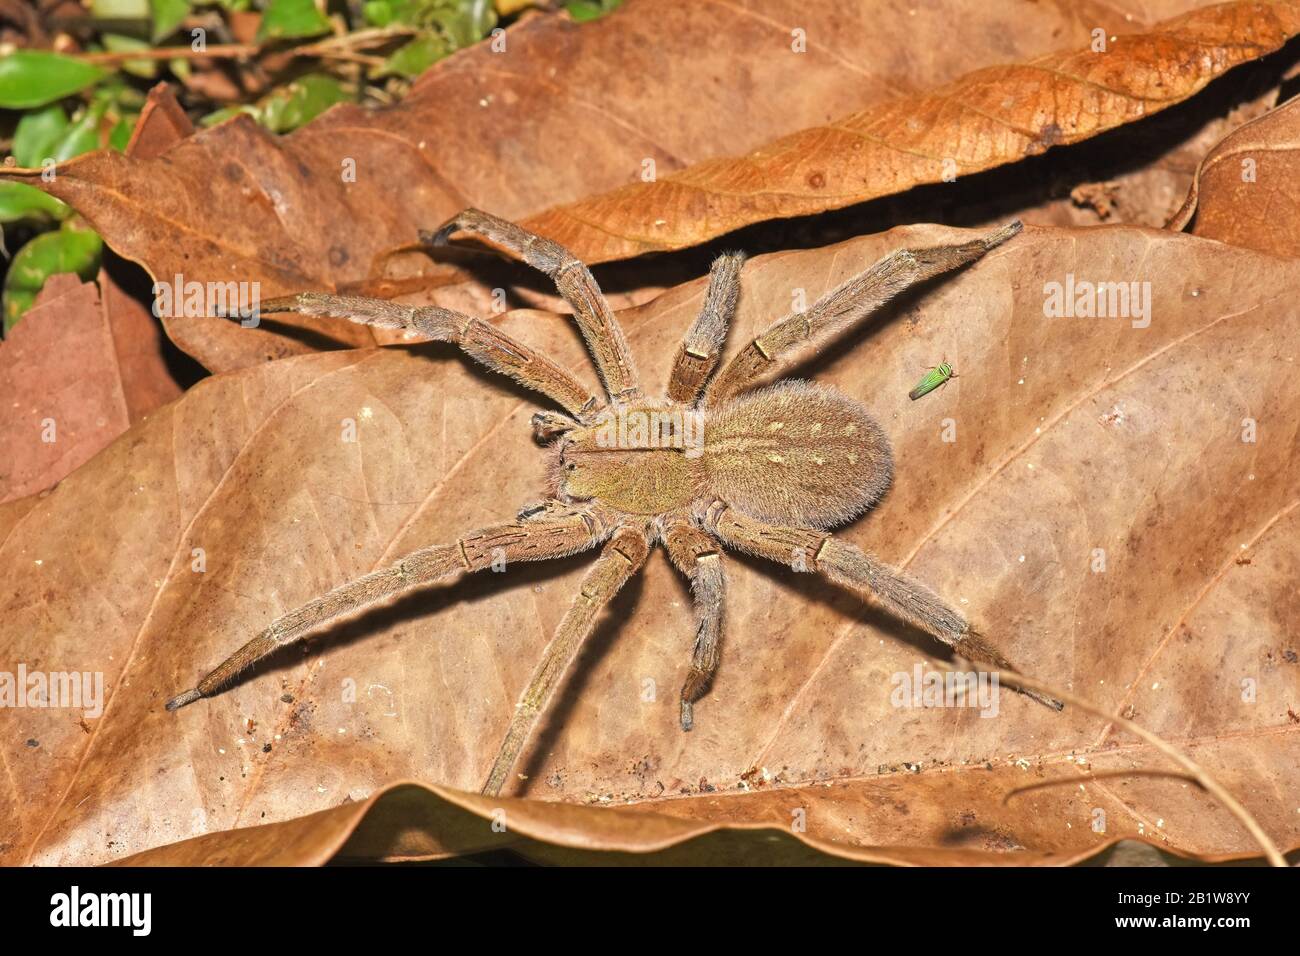 Big spider camouflage on dry leaf , Costa rica Stock Photo